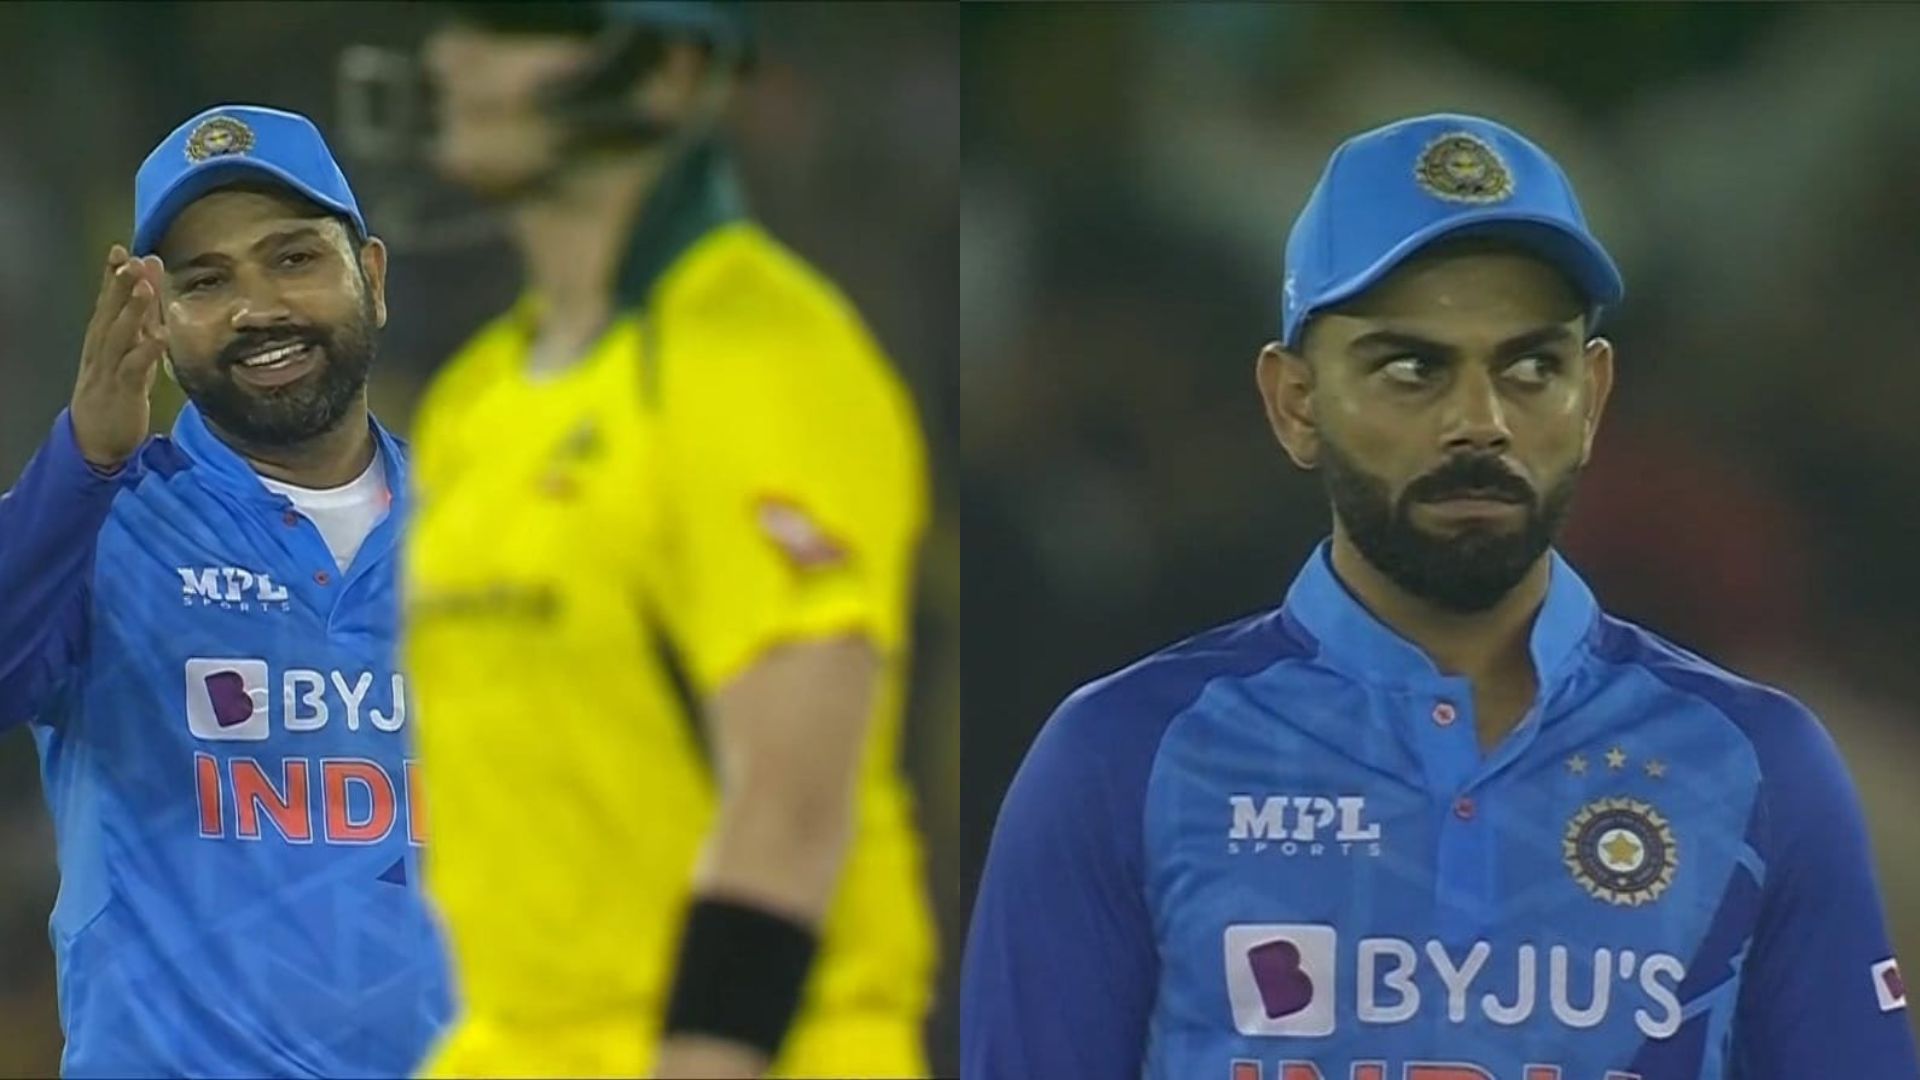 Some hilarious reactions from Indian players caught the fans